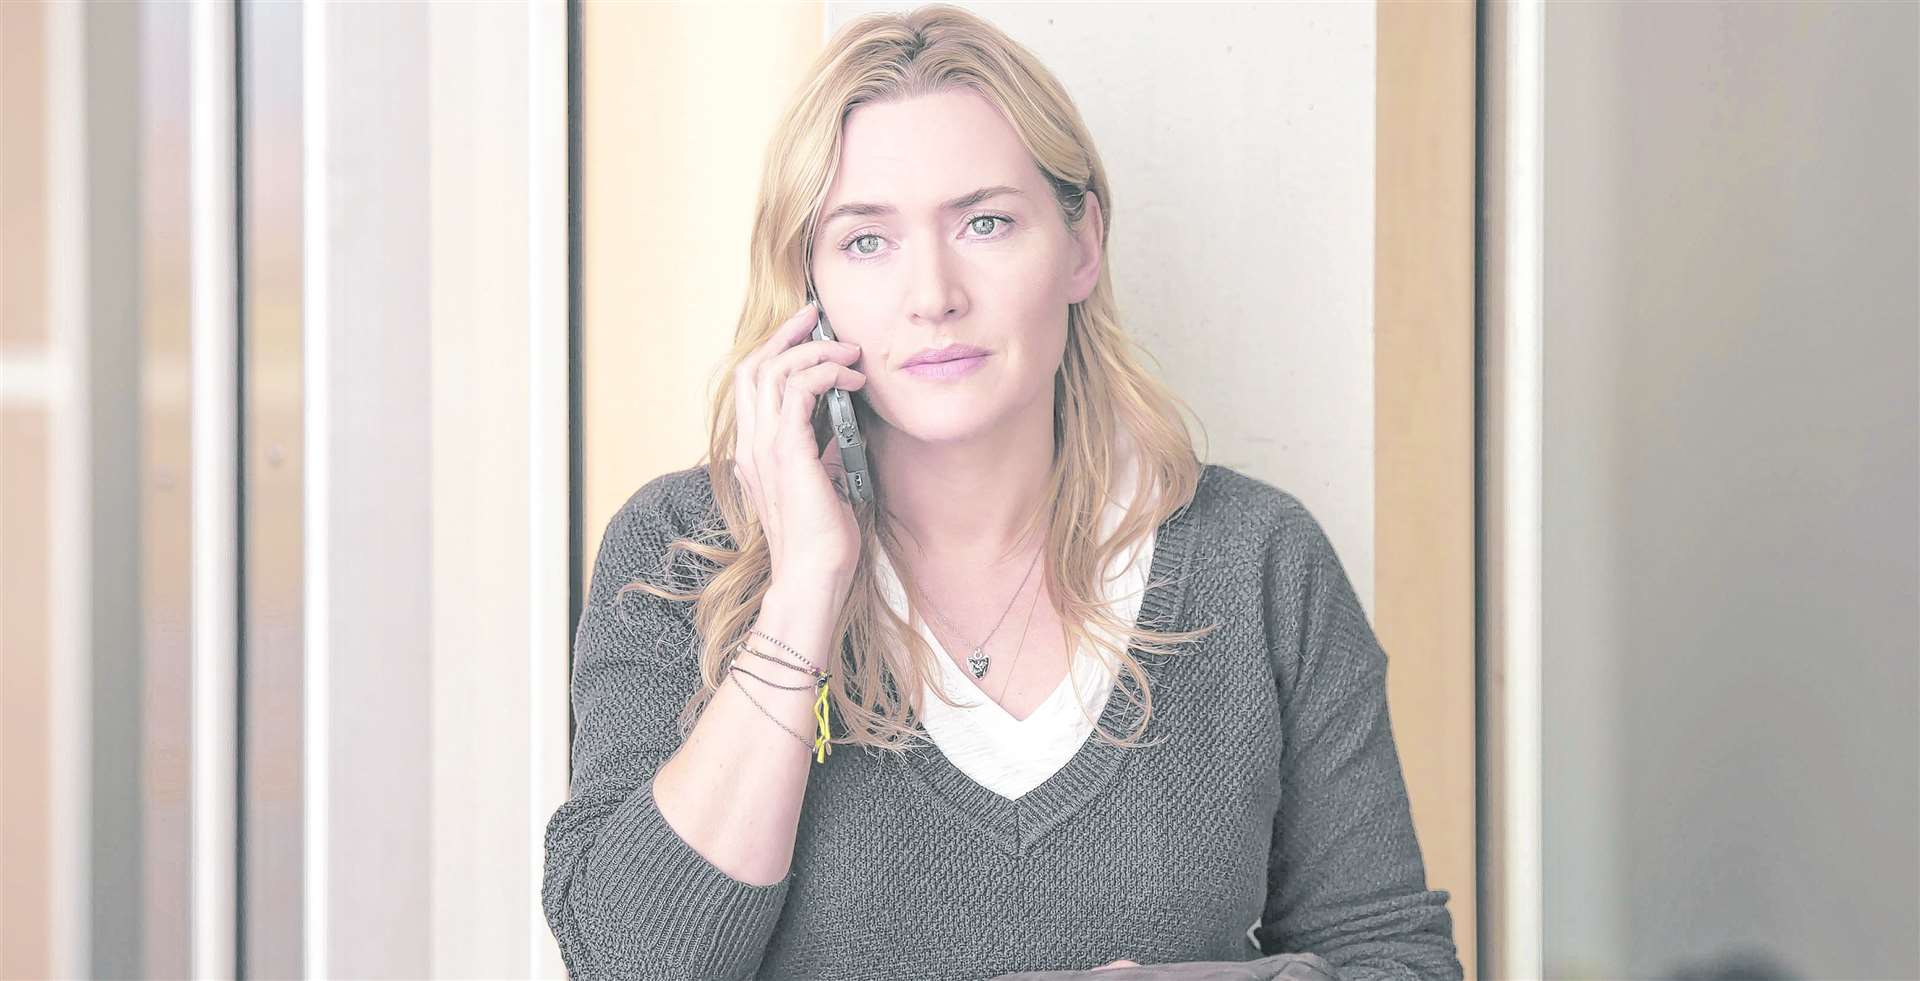 Kate Winslet will star in the French Dispatch later this year